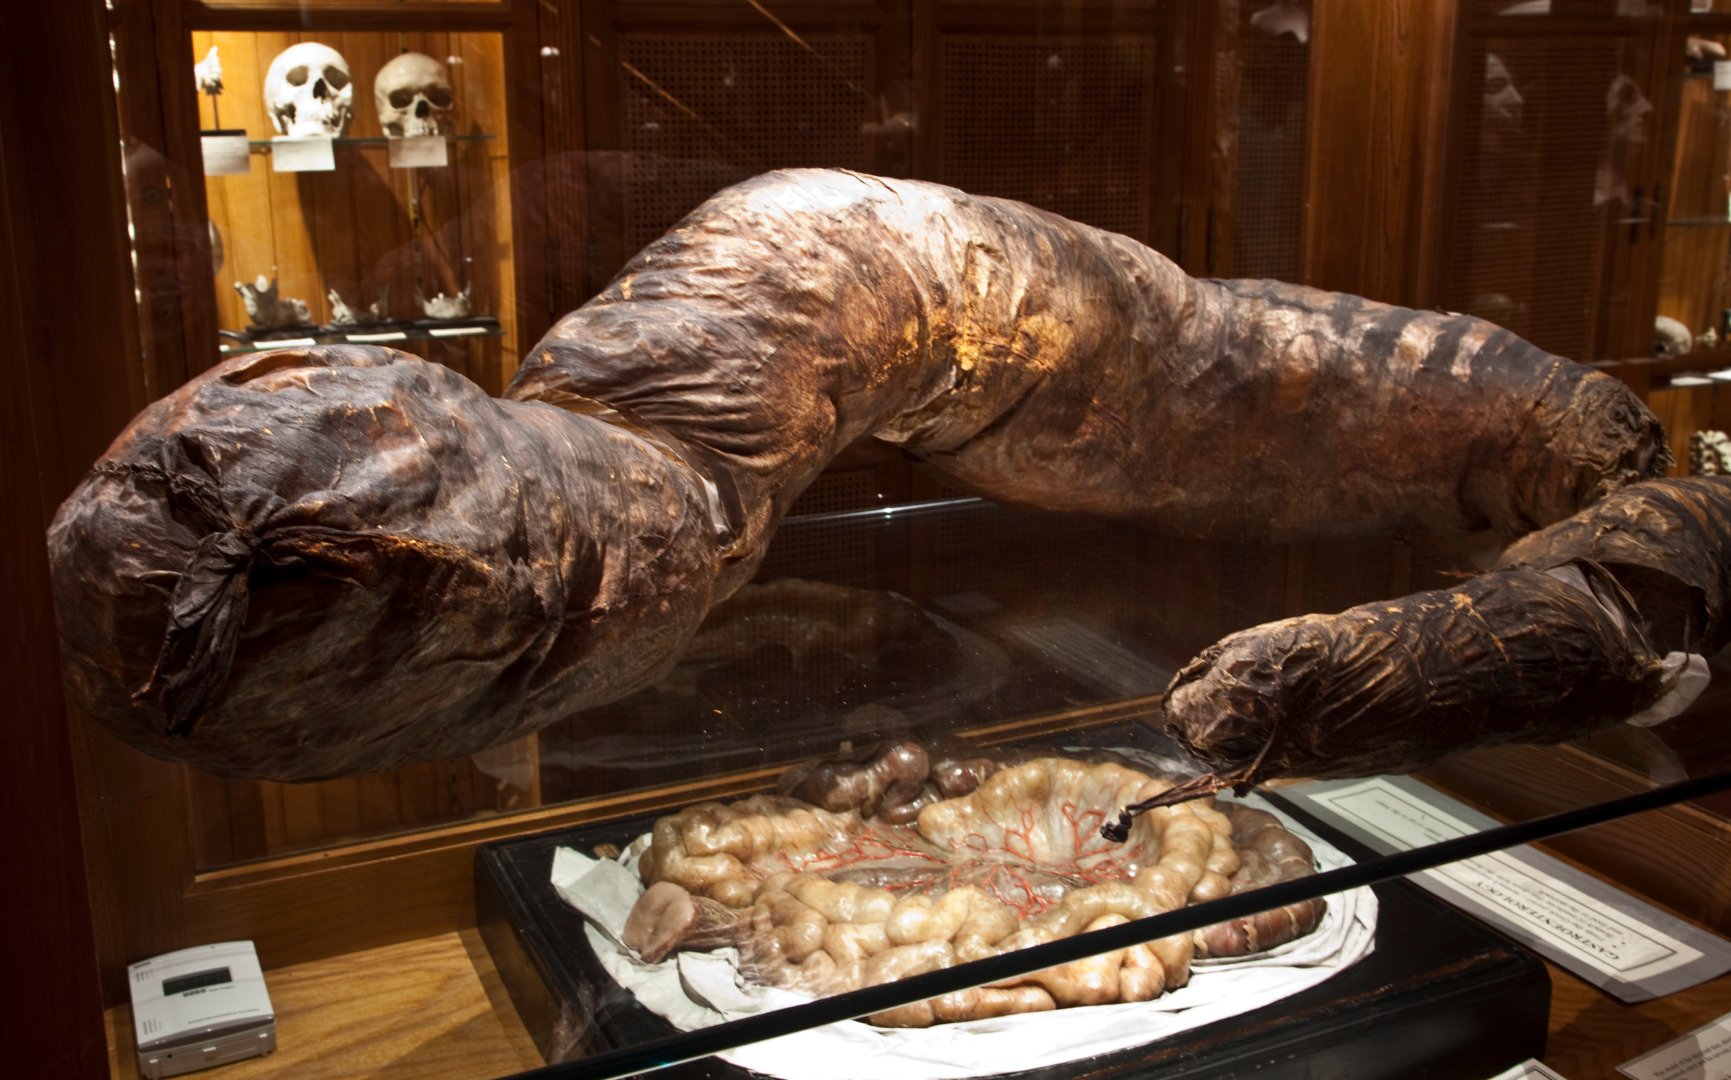 The Mutter Museum holds a collection of medical oddities and unusual specimens.